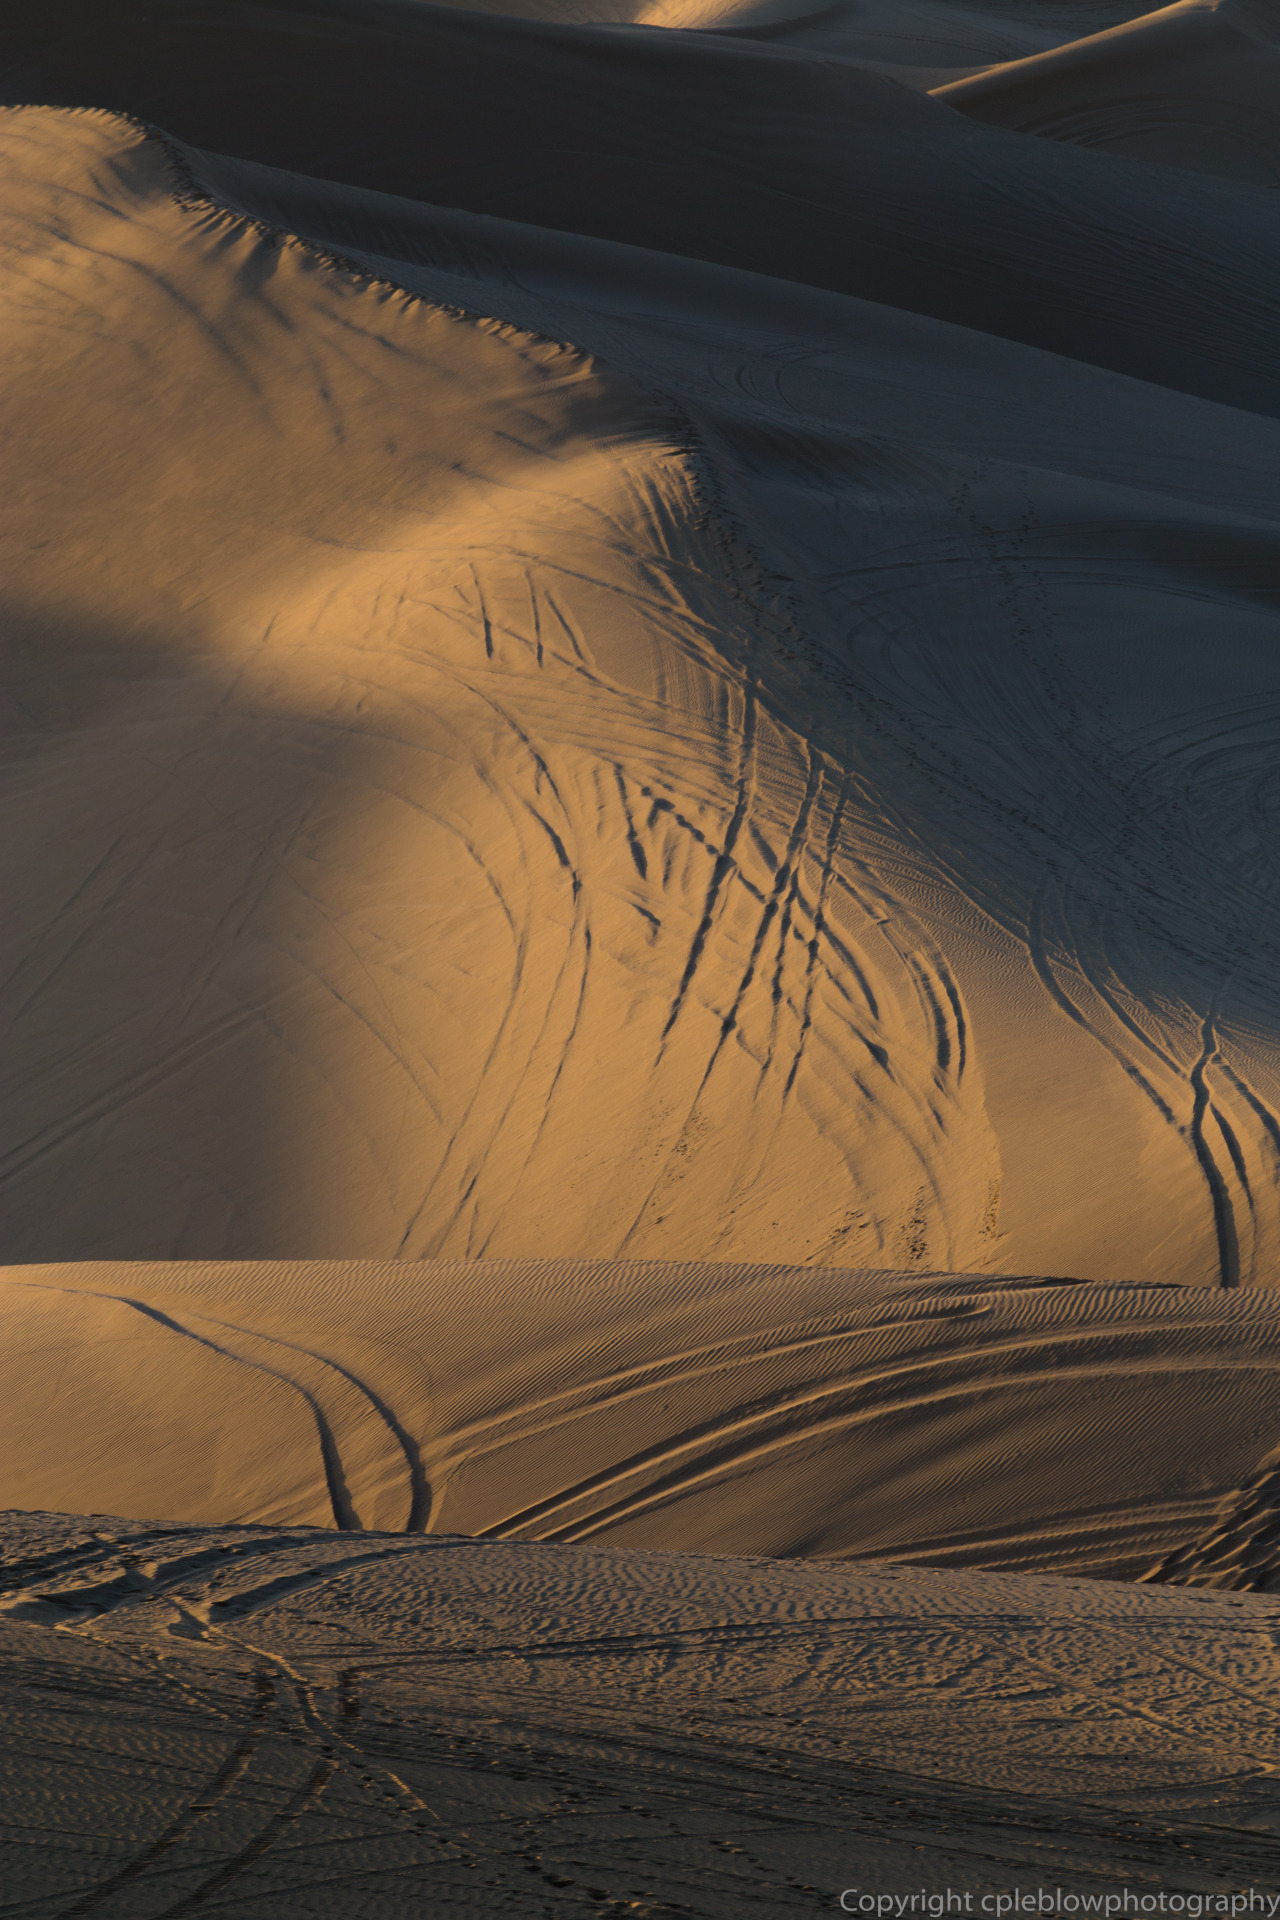 shot while listening to space pod boogie*
cpleblow
algodones south dunes, just after sunrise (imperial dunes, glamis)
*check out bim tim on soundcloud, sick remix! 
your thoughts always welcome?